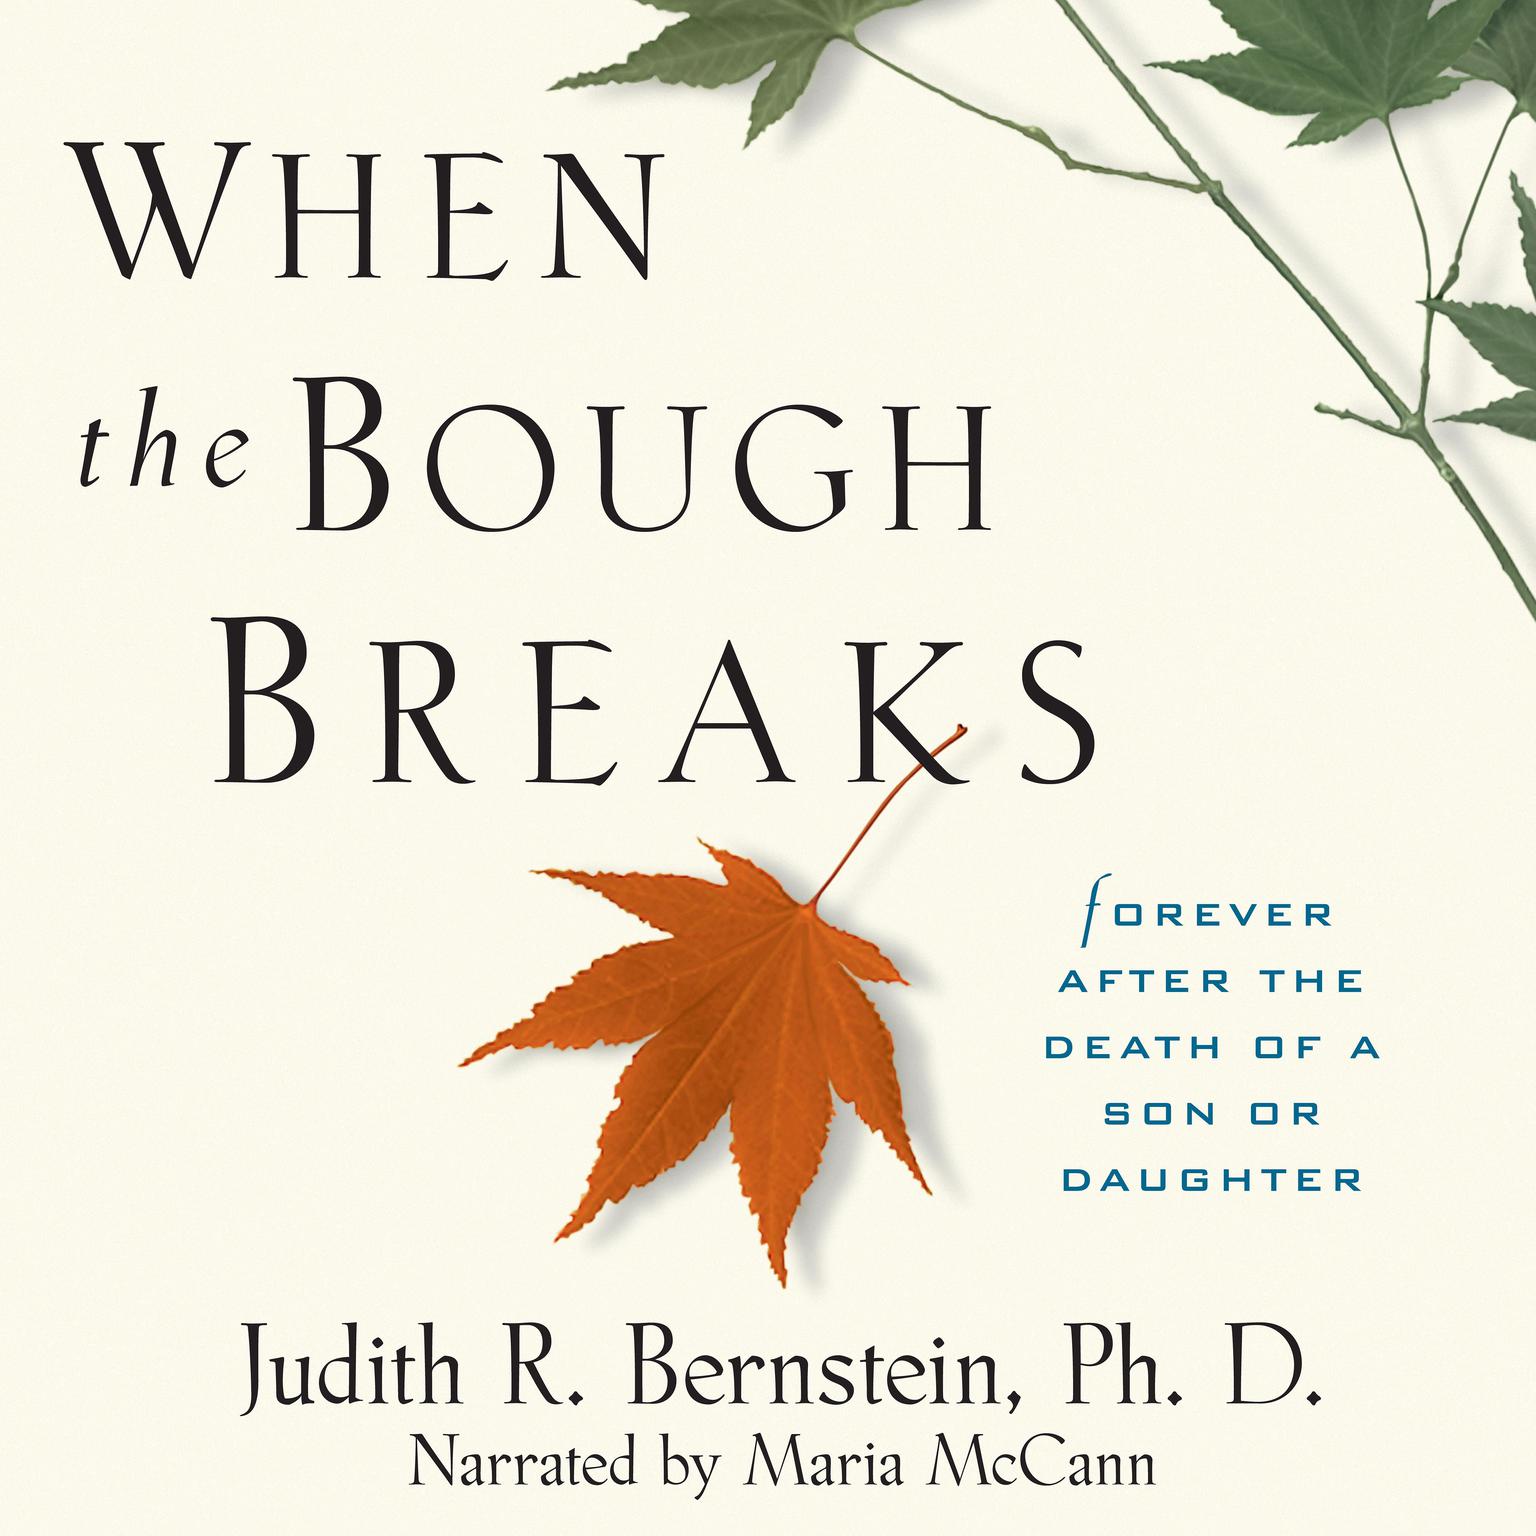 When the Bough Breaks: Forever After the Death of a Son or Daughter Audiobook, by Judith R. Bernstein